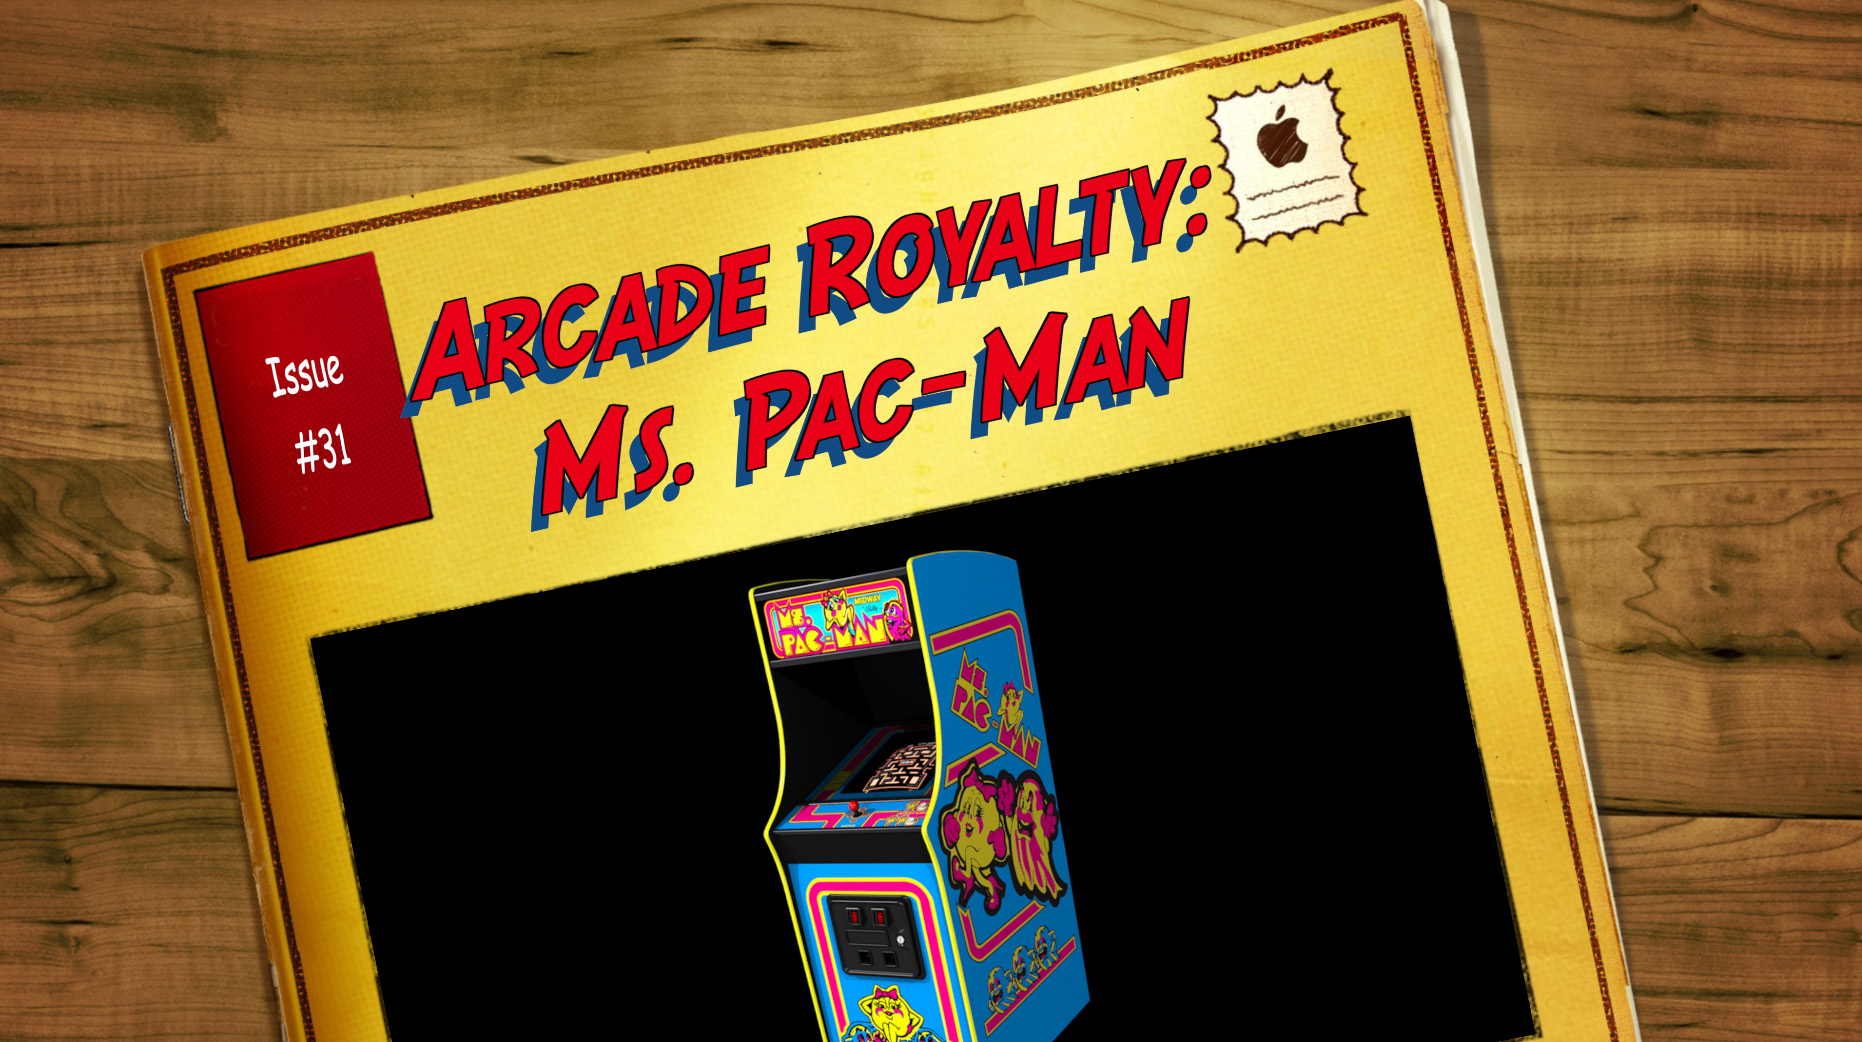 Issue #31 Arcade Royalty: Ms. Pac-Man